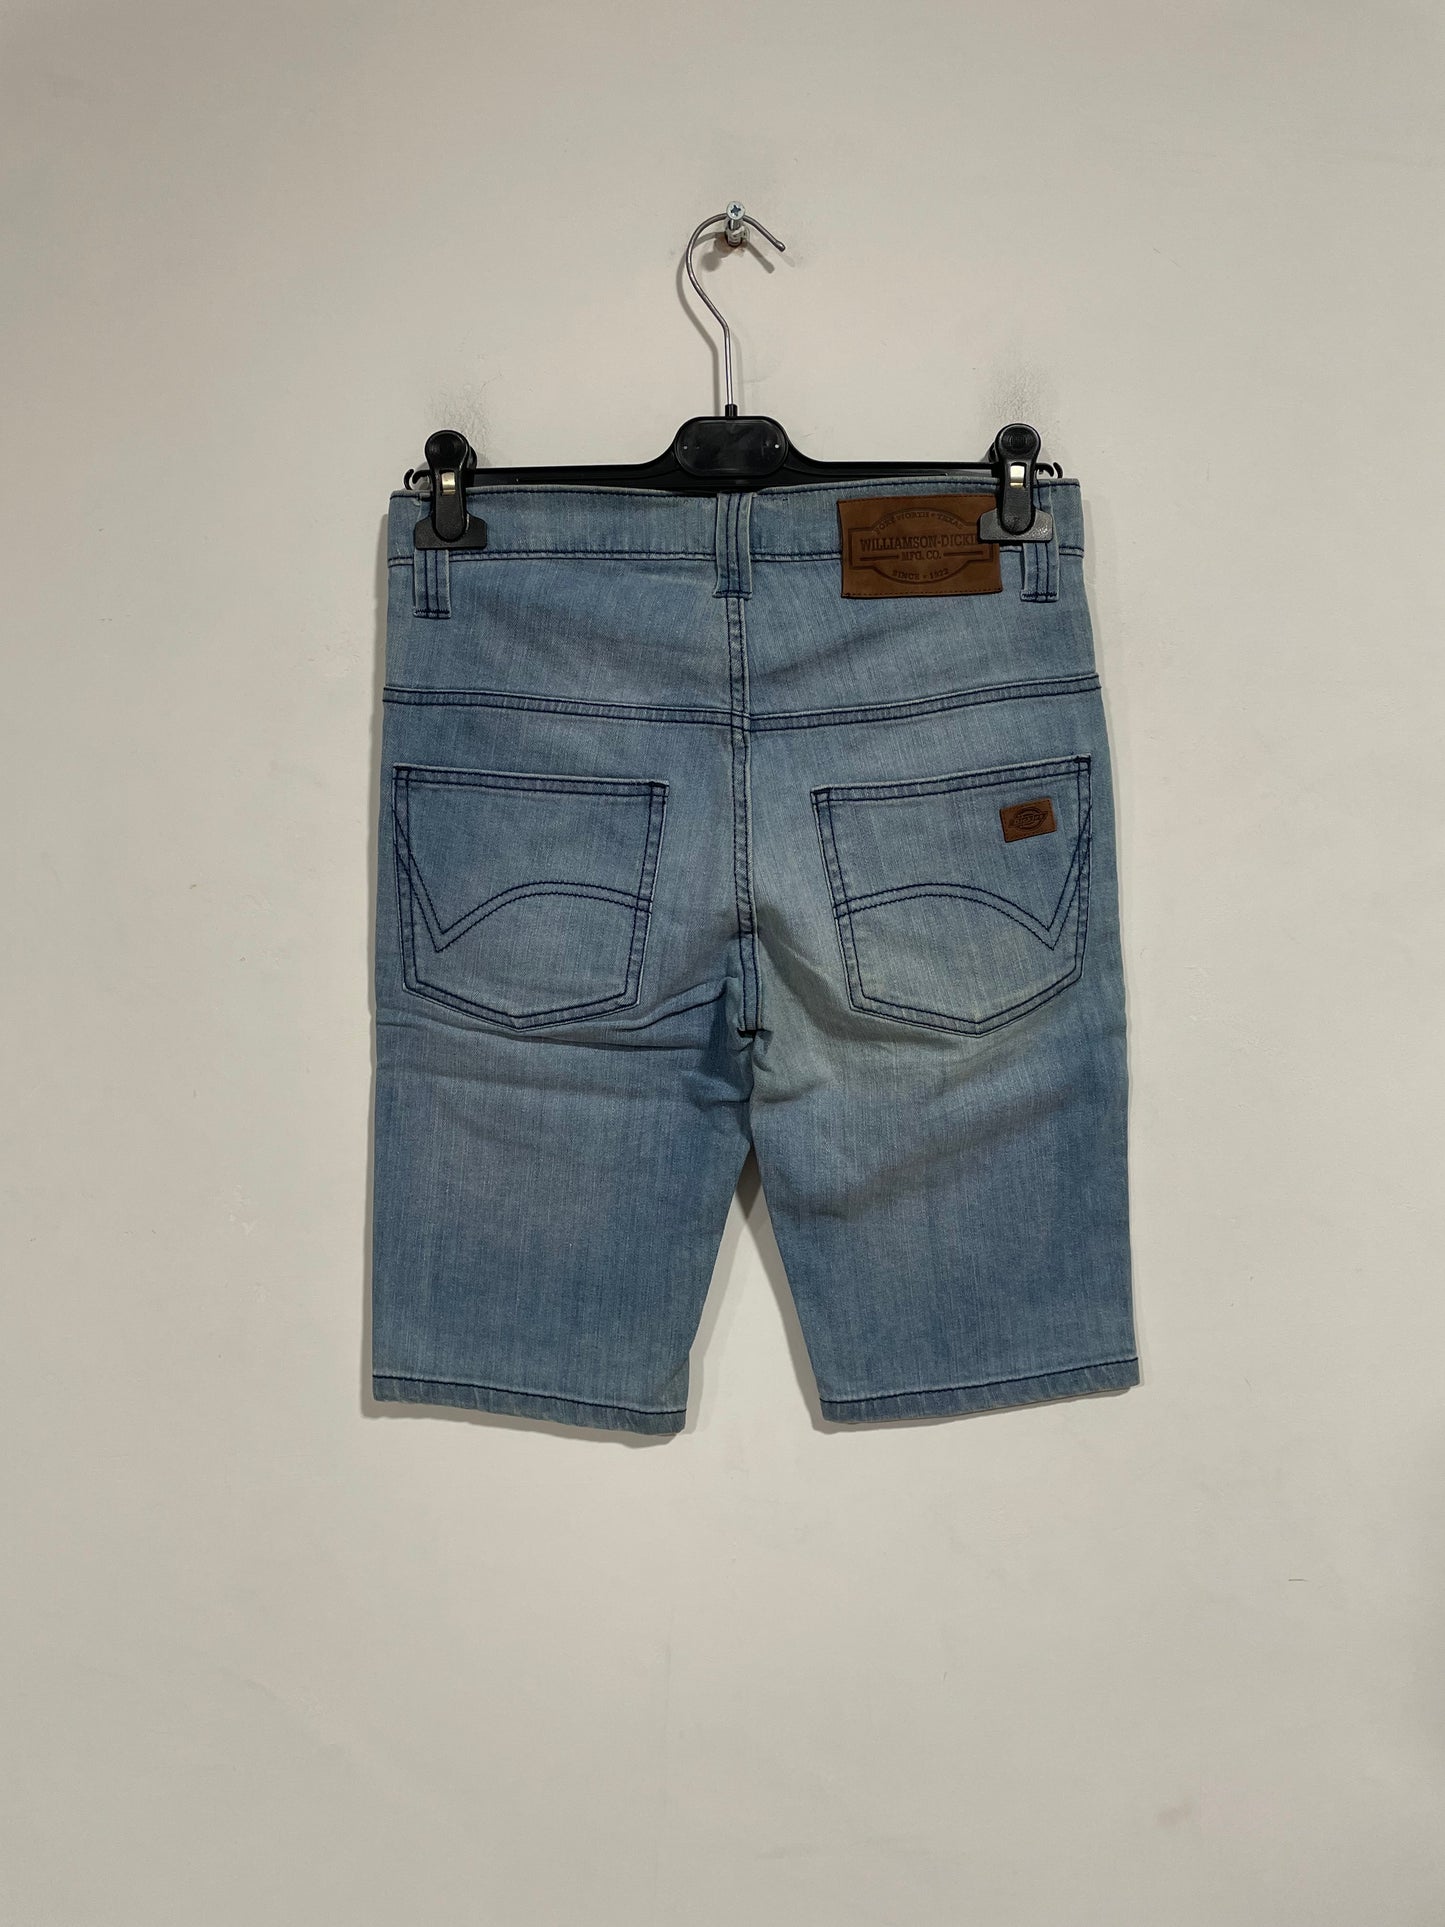 Shorts Dickies in jeans nuovo con cartellino (D718)